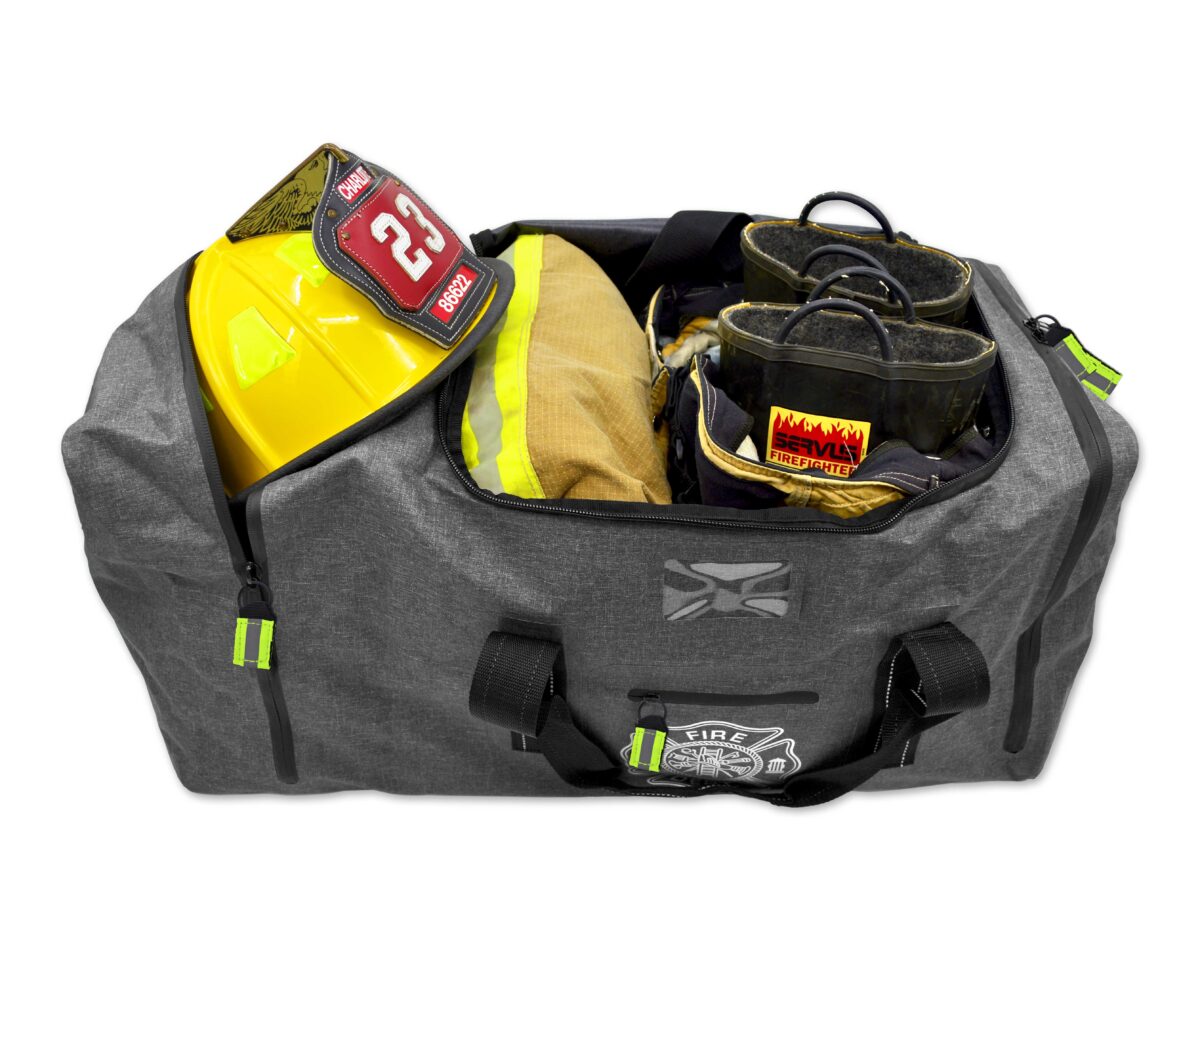 LXFB99 Lightning X Carcinogen Resistant Turnout Gear Dry Bag Prevents Off Gassing